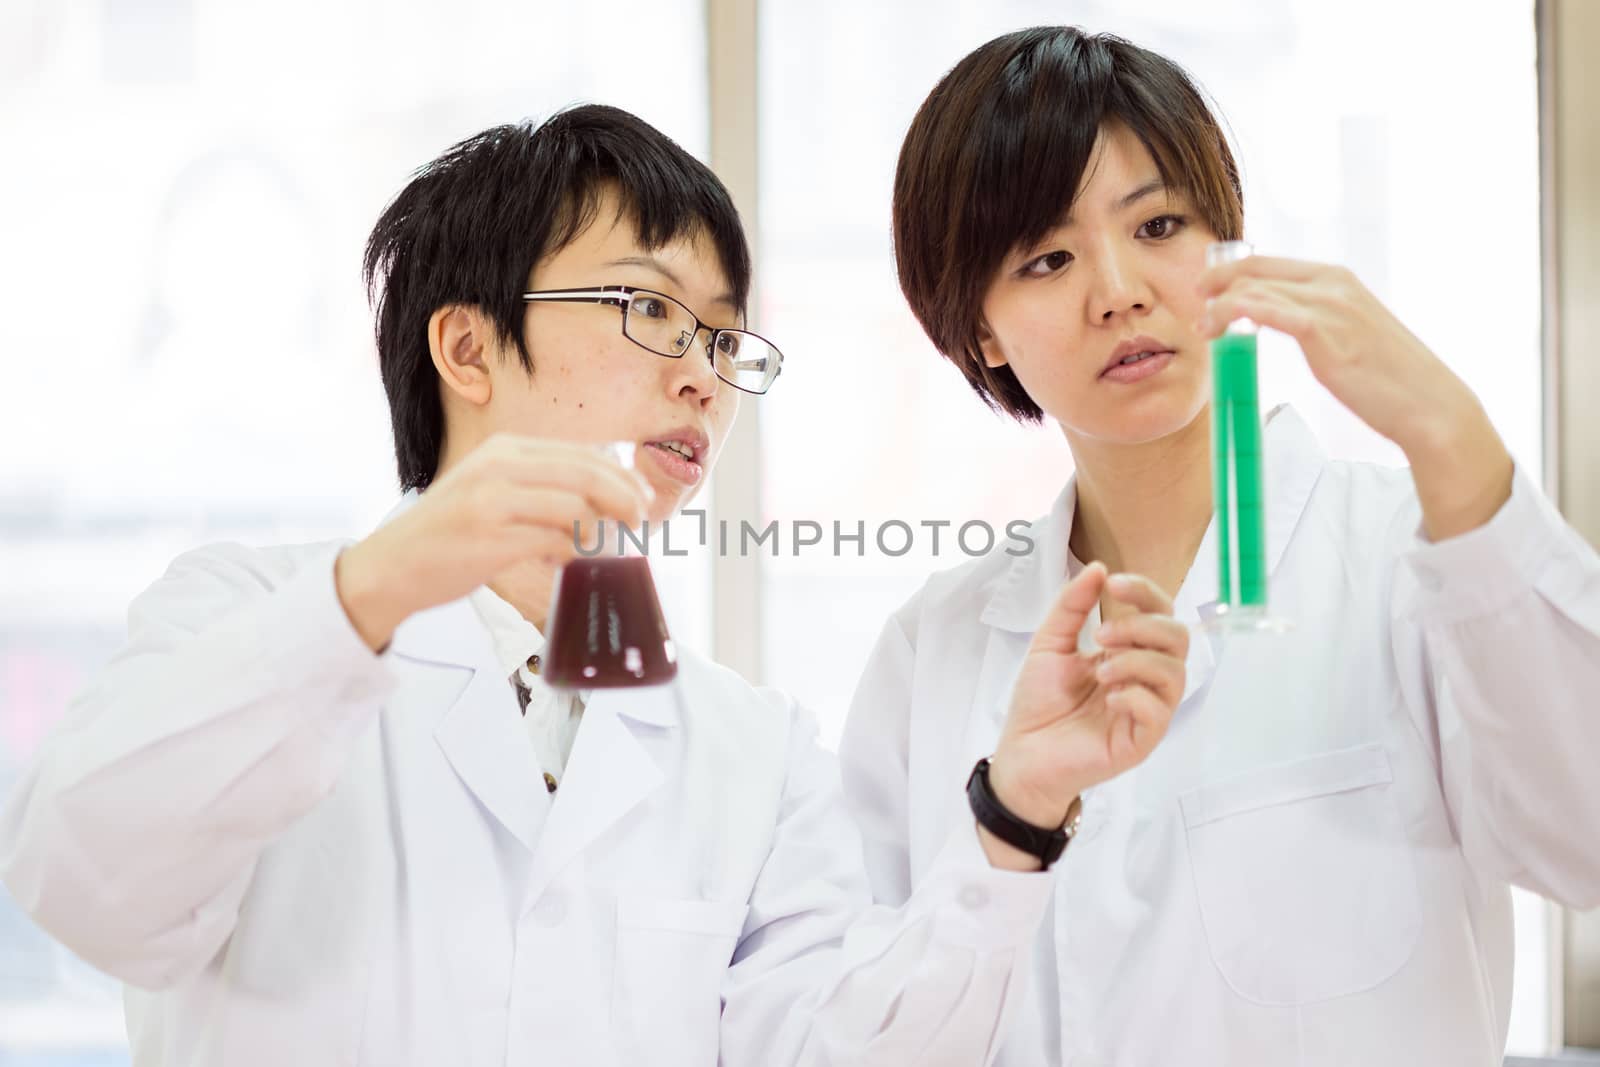 Asian female scientists in lab by imagesbykenny